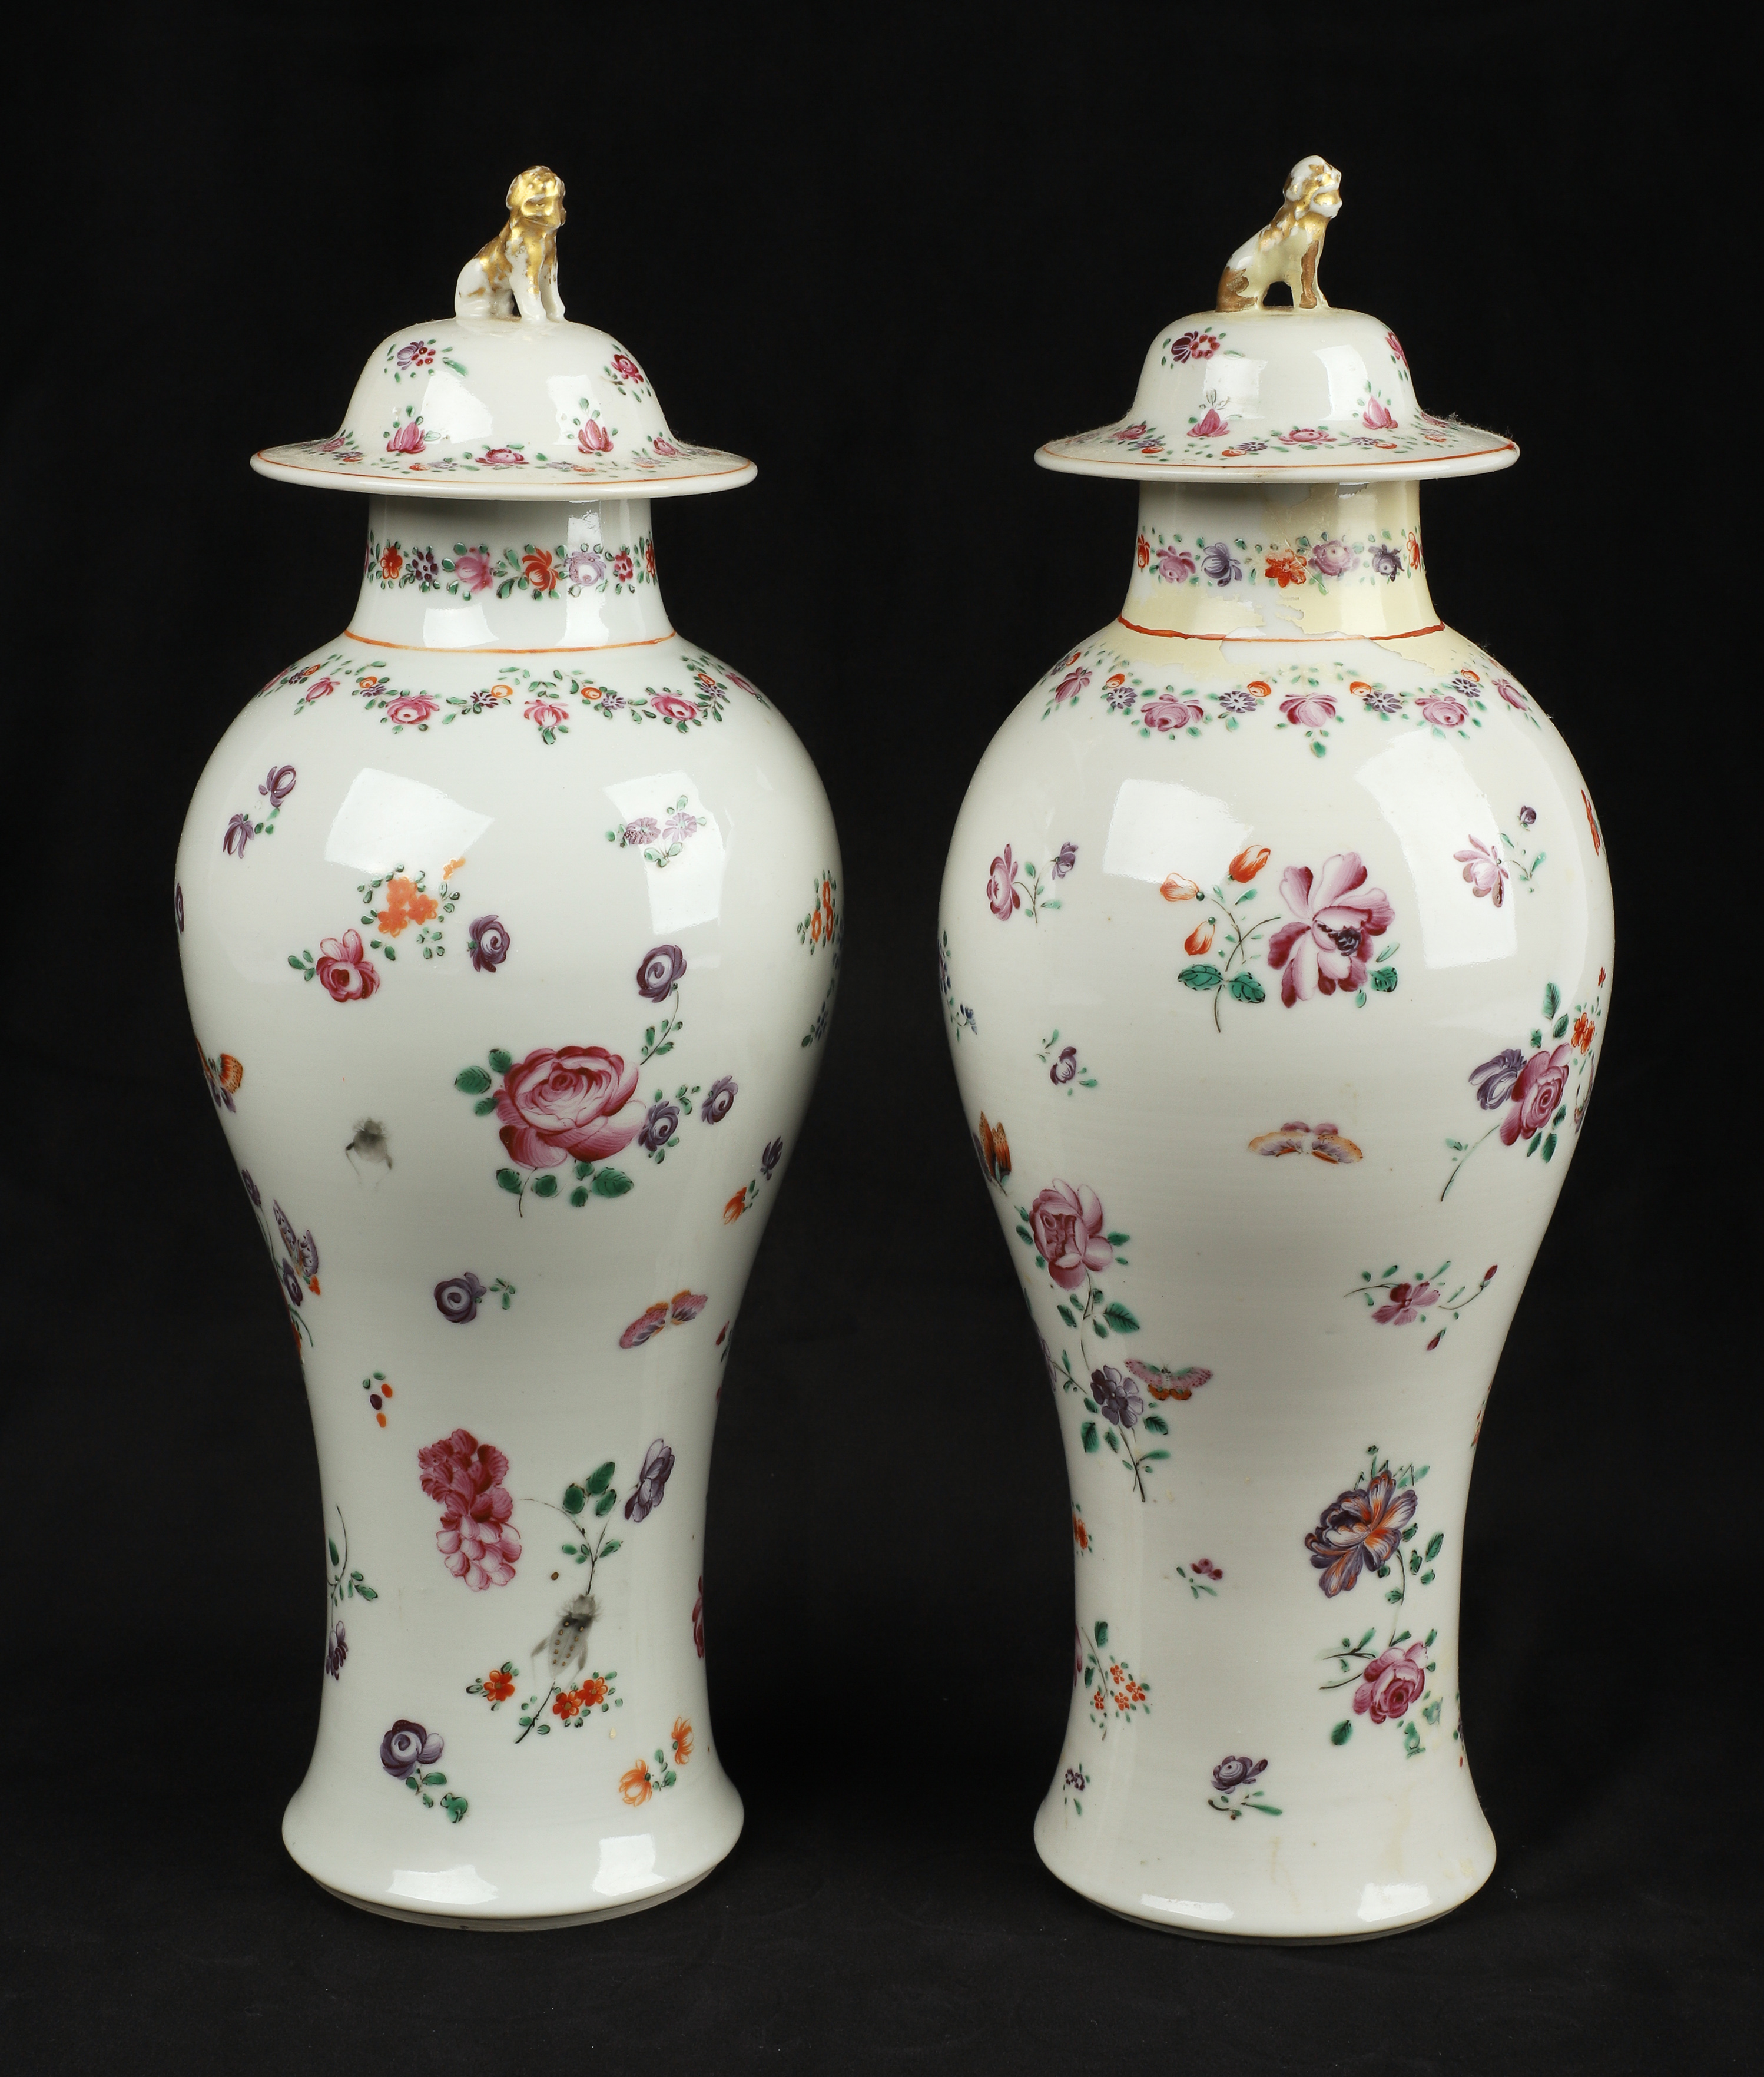 Pair of Chinese export porcelain